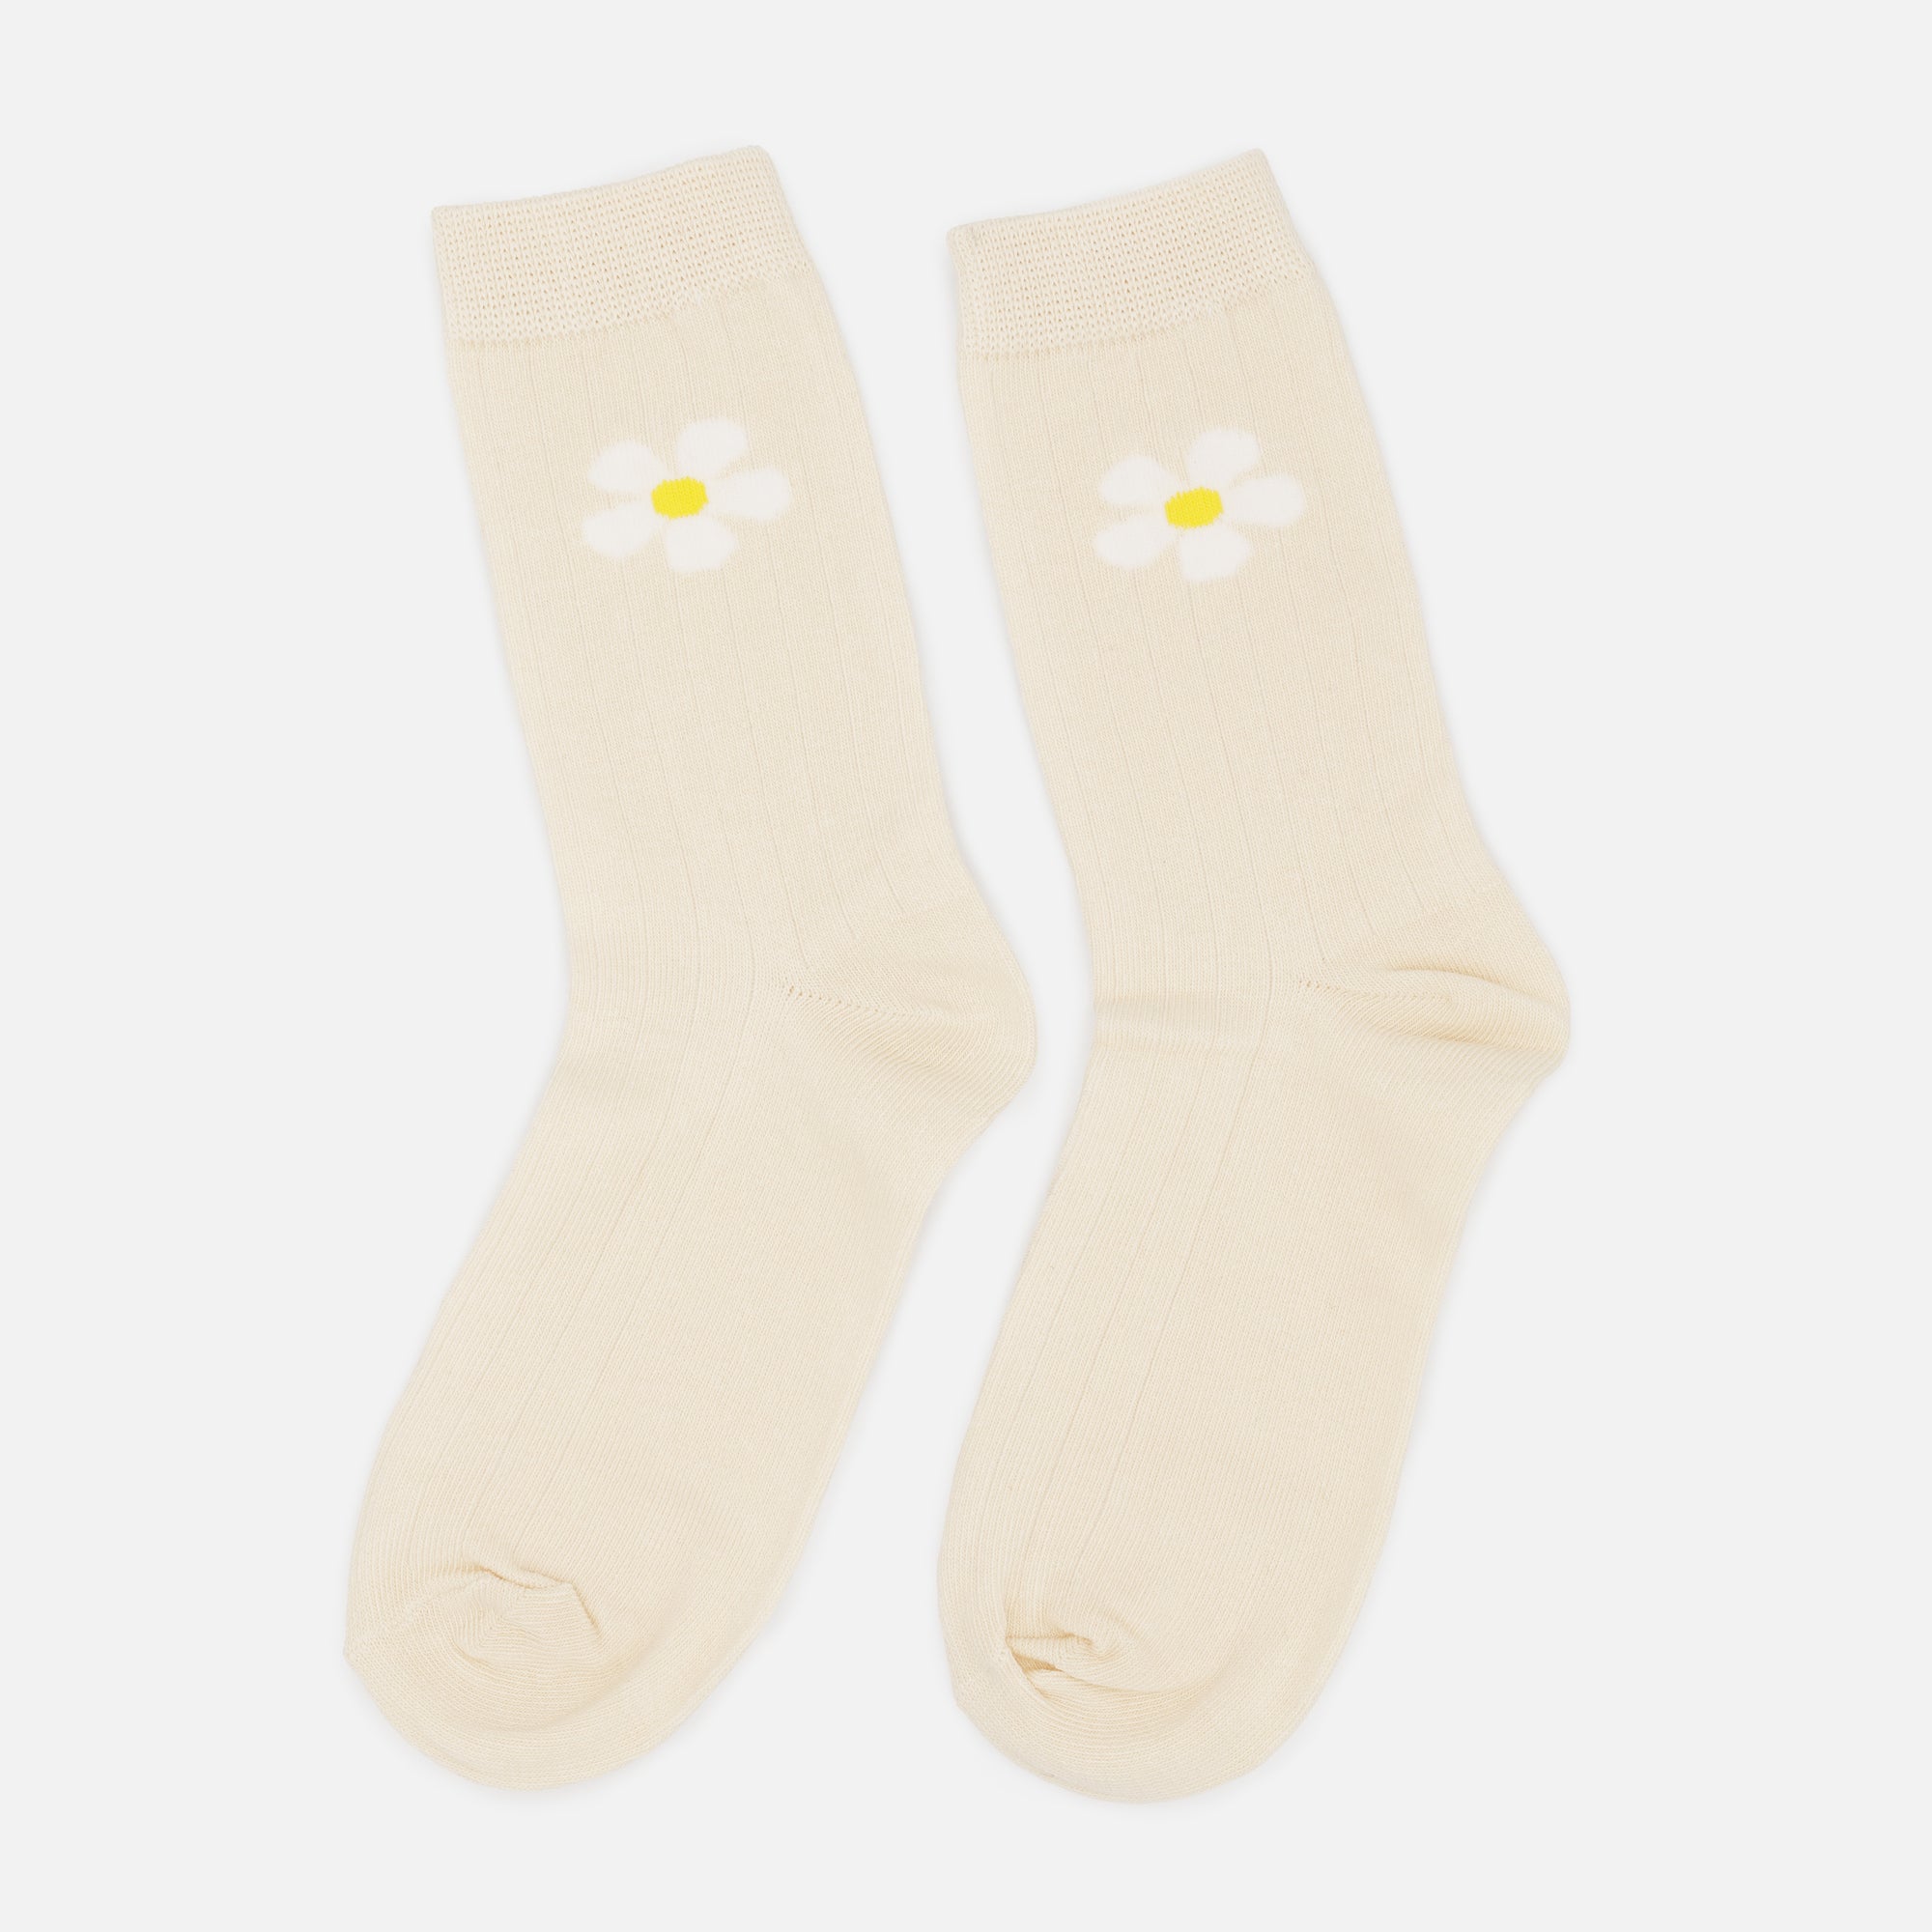 Cream ribbed socks with daisies